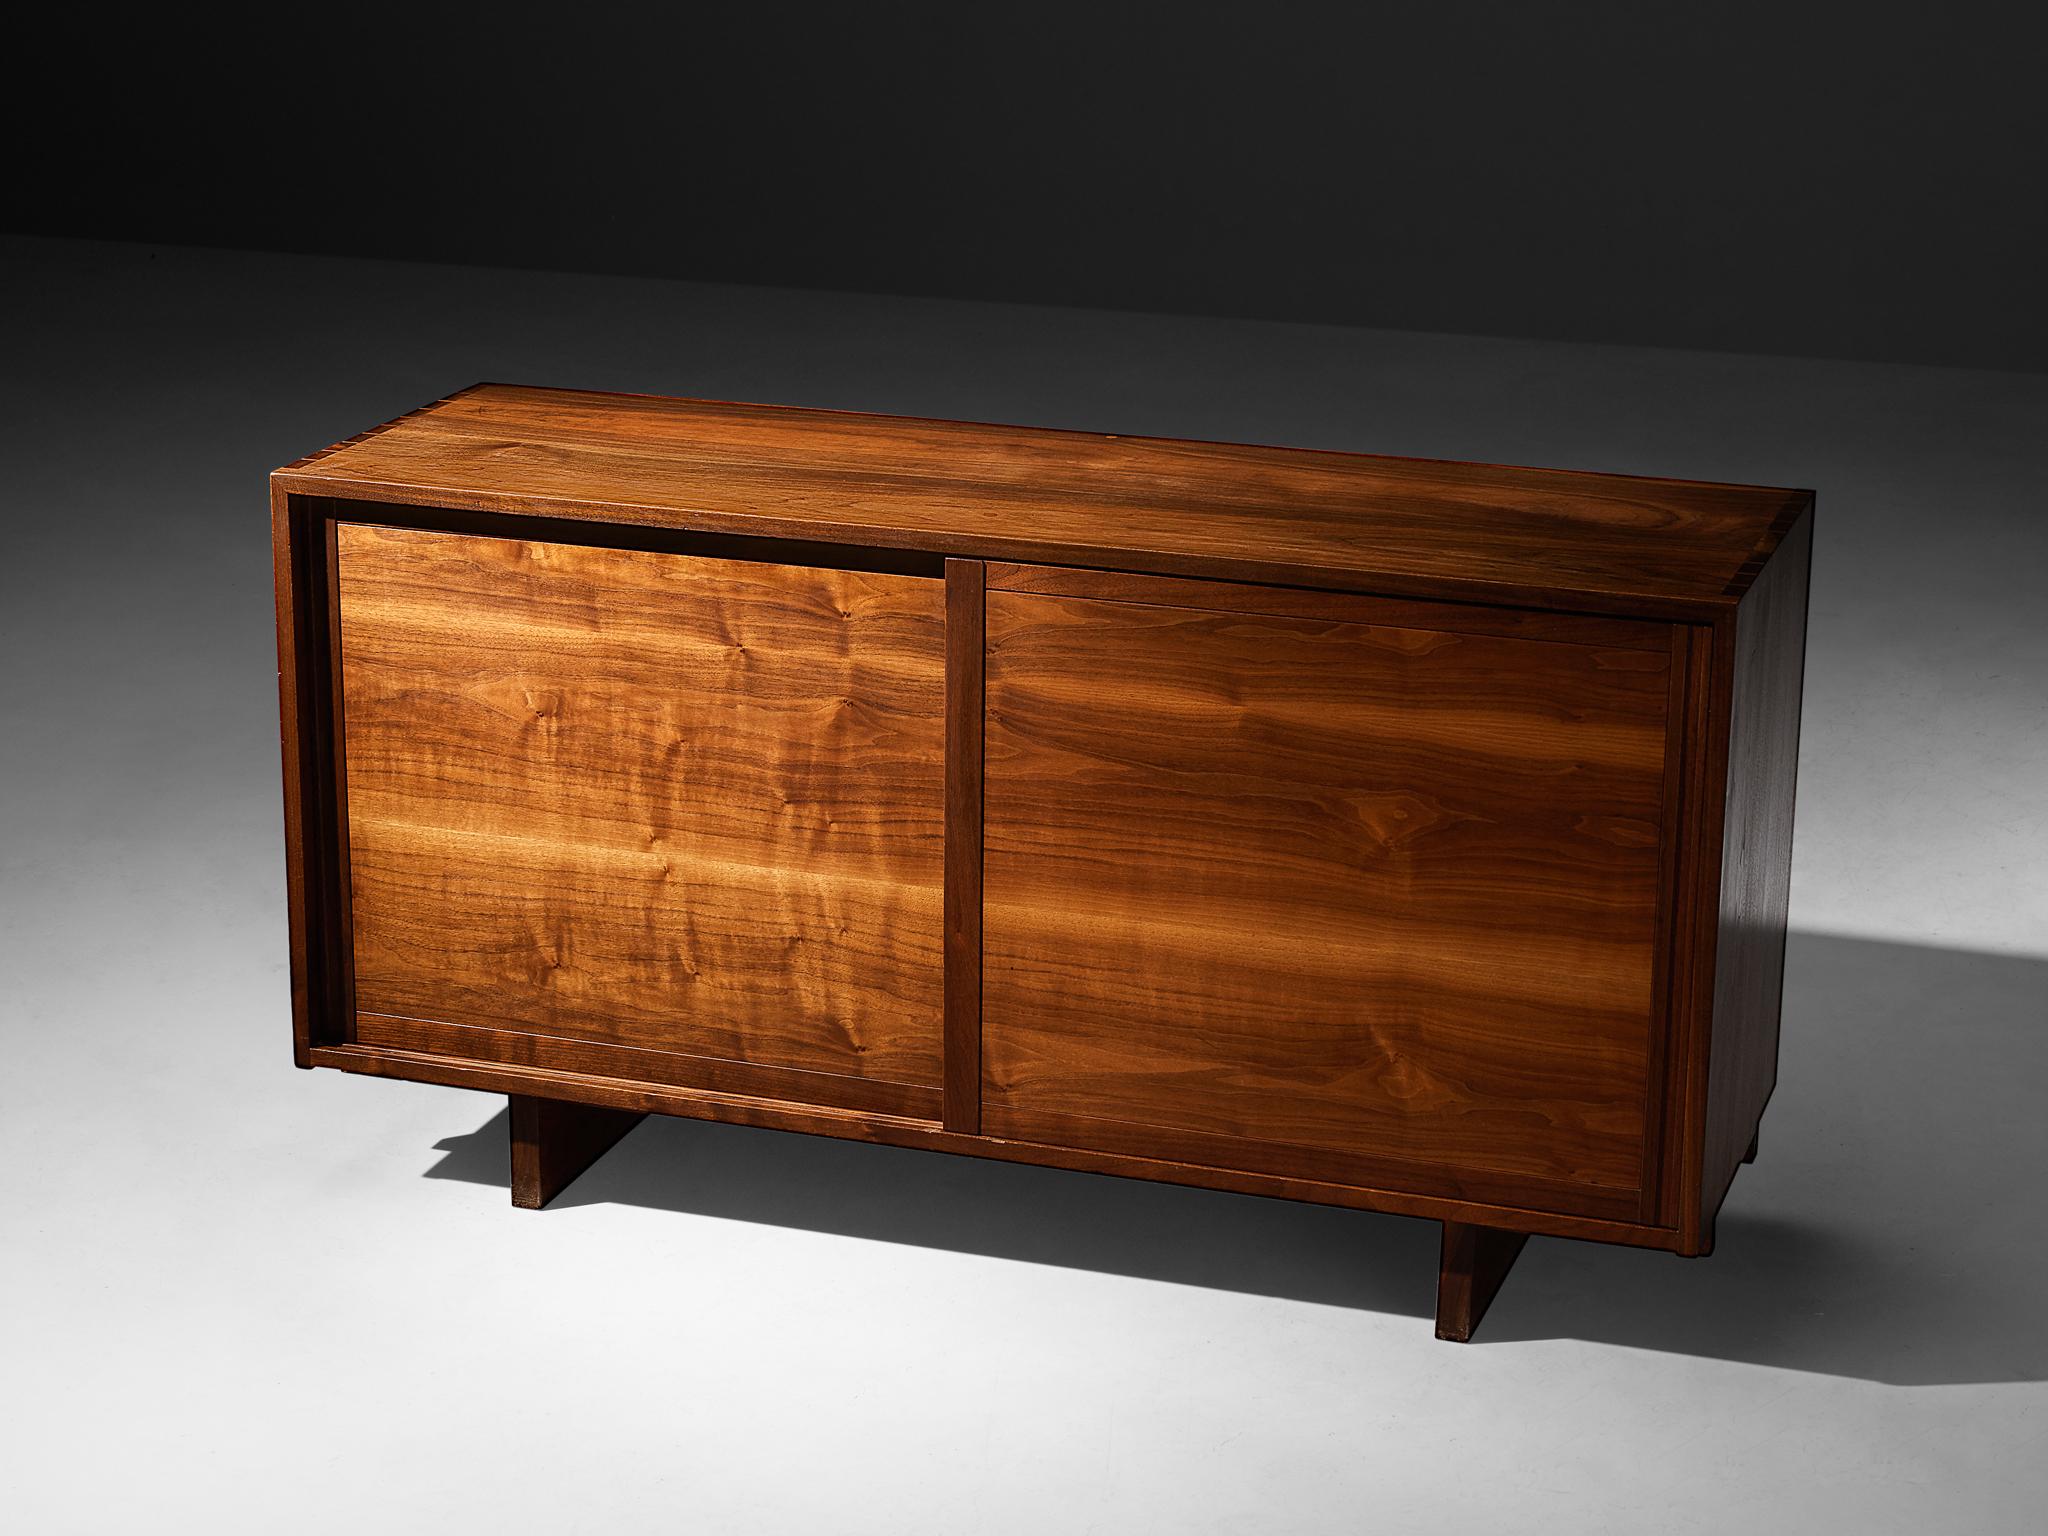 George Nakashima, sideboard with sliding doors, walnut, United States, 1956

With regard to its essential form, material use, and woodwork, this two sliding-door cabinet is a testimony to George Nakashima's expert craftsmanship and distinctive